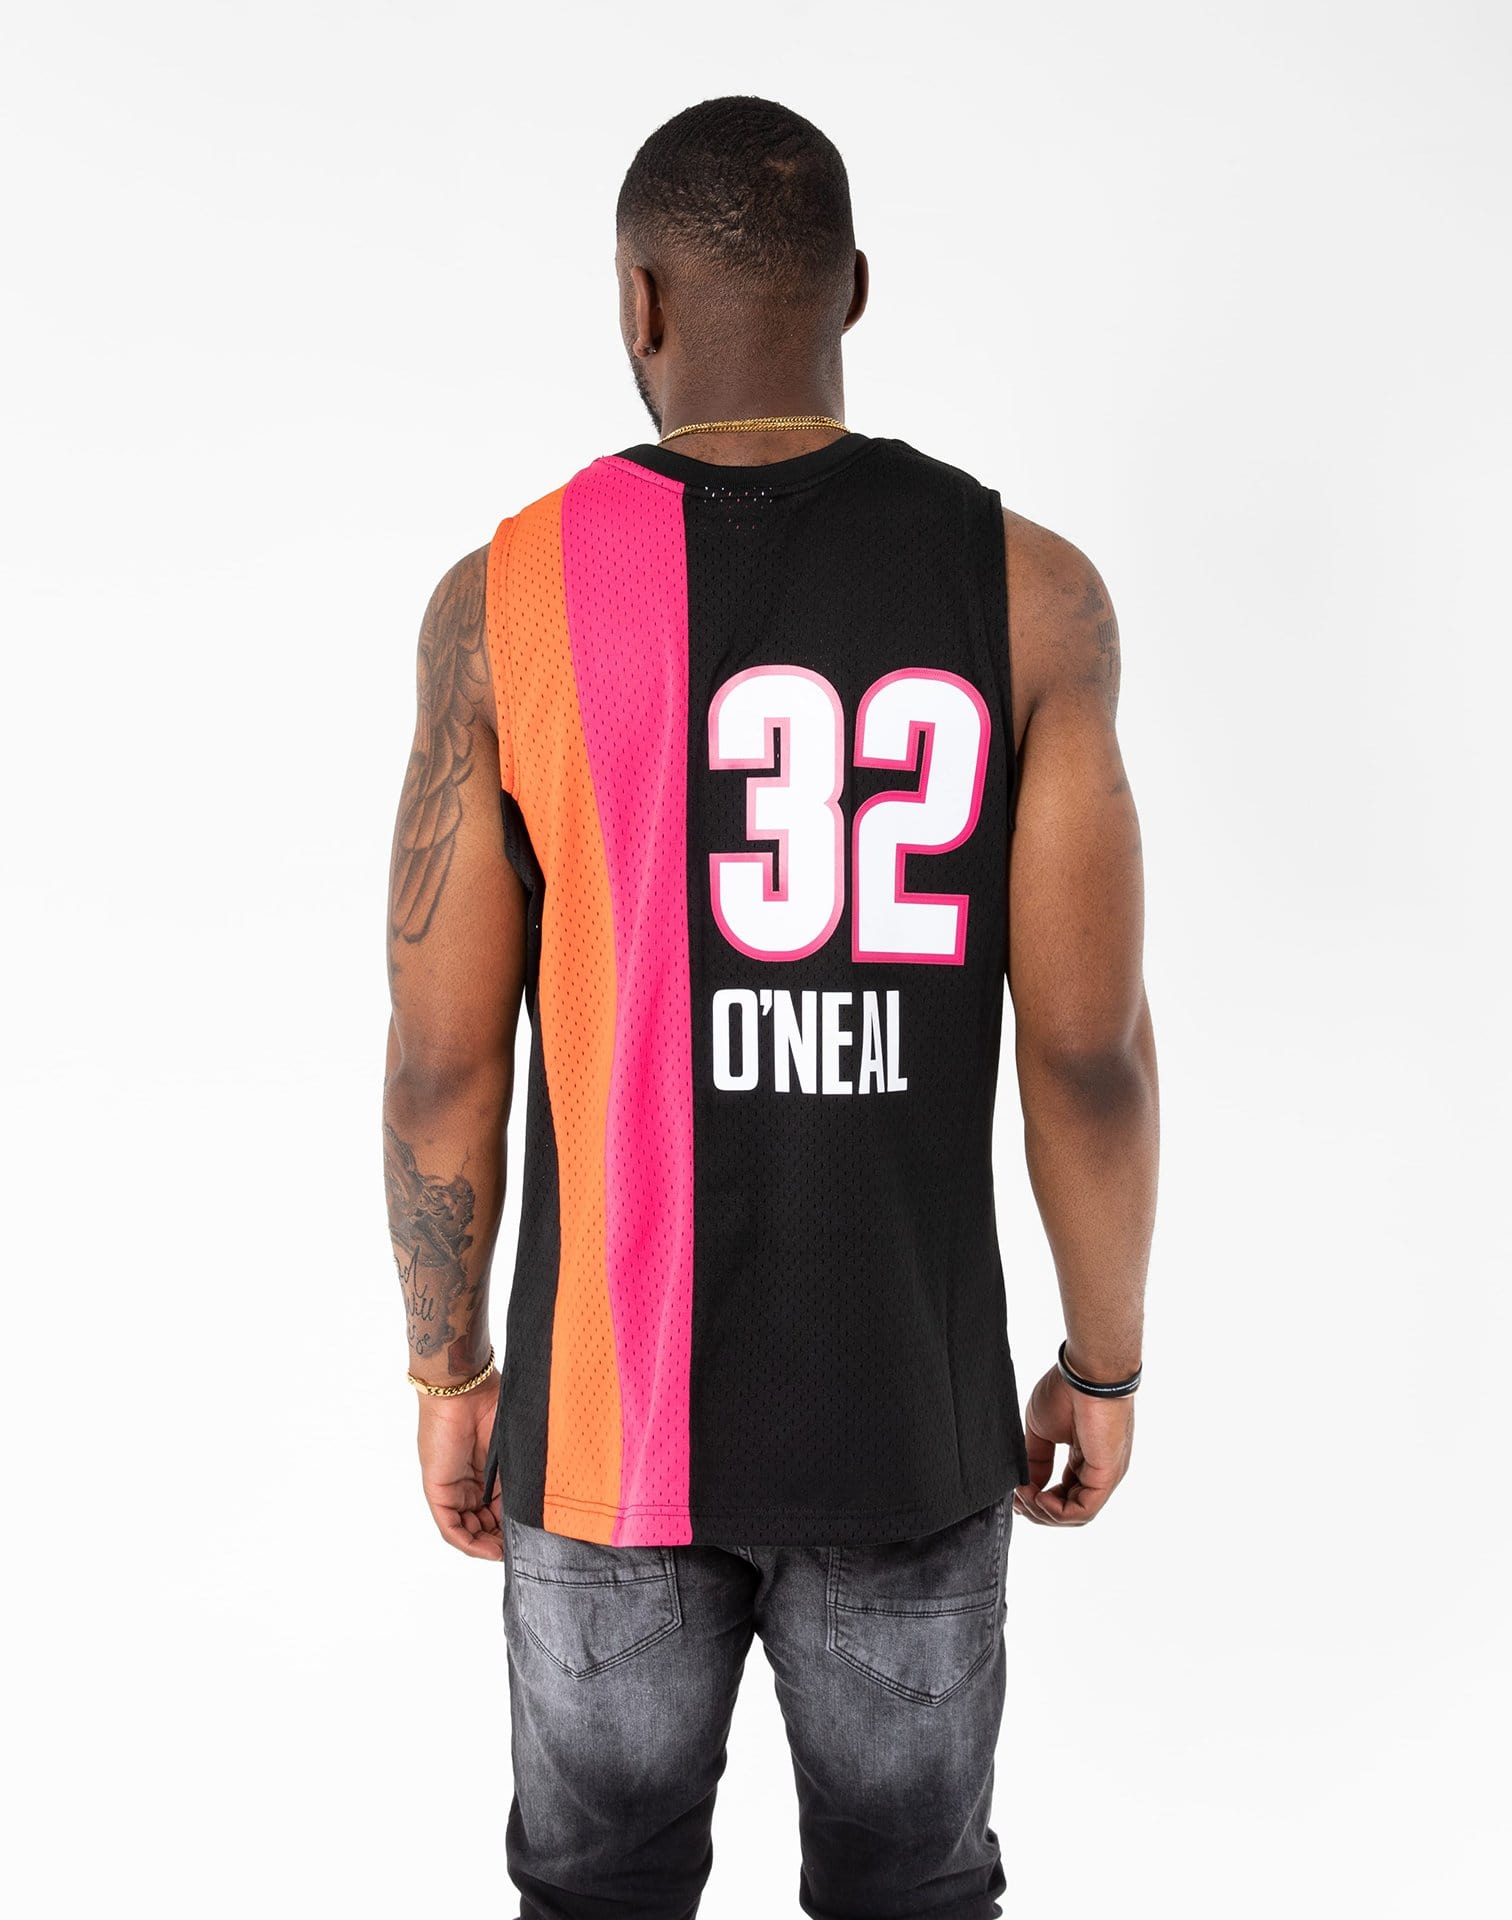 Shaquille O'Neal Apparel, Shaquille O'Neal Miami Heat Jerseys